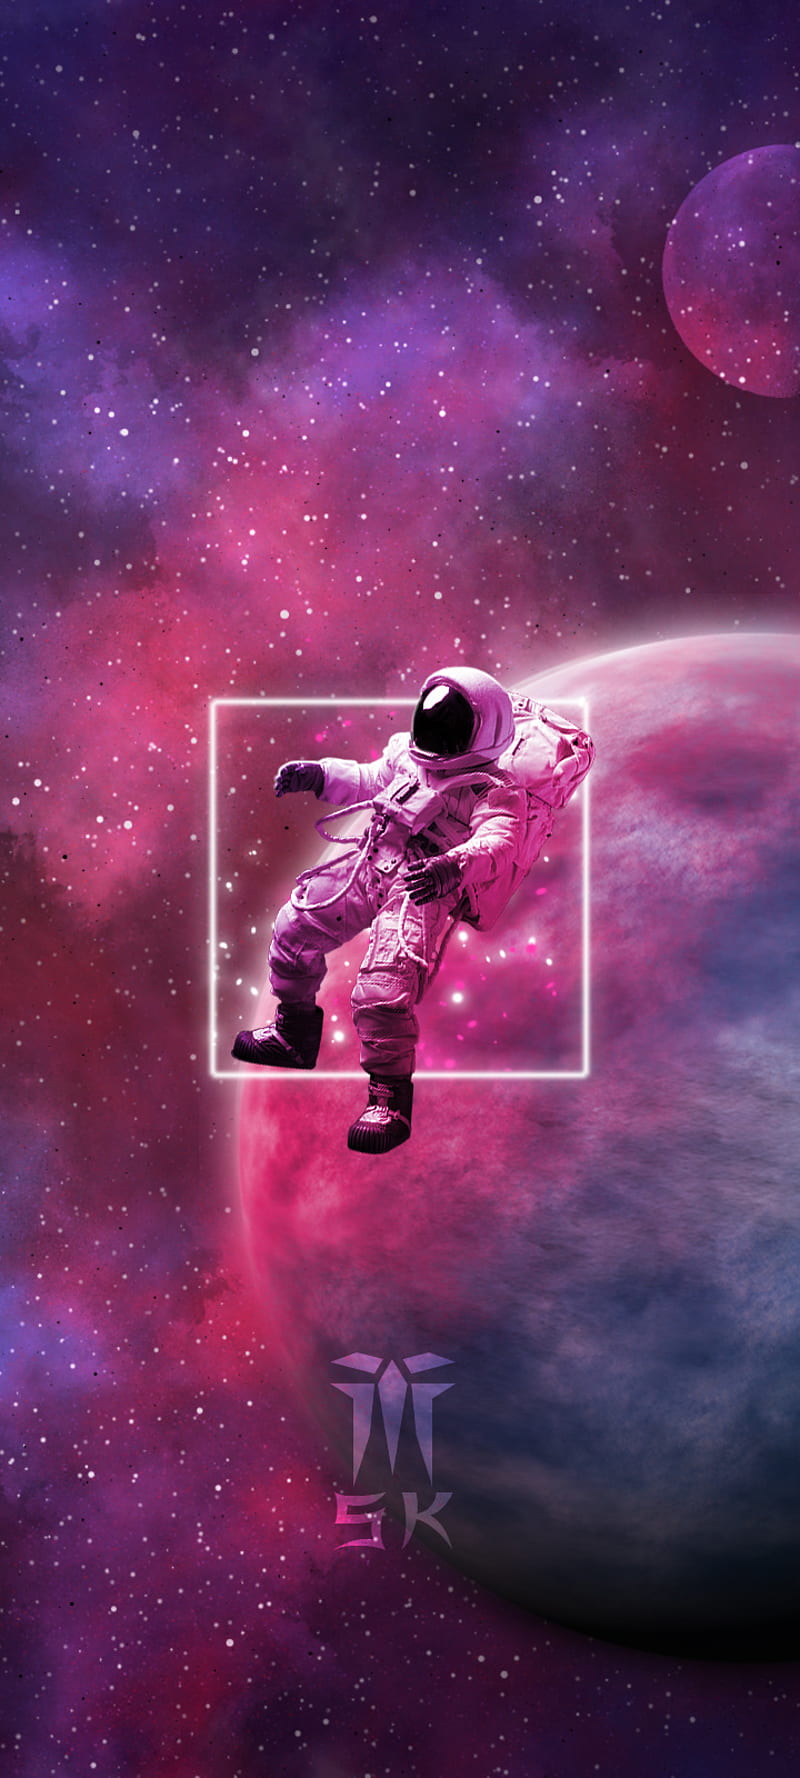 IPhone wallpaper of an astronaut floating in space - Astronaut